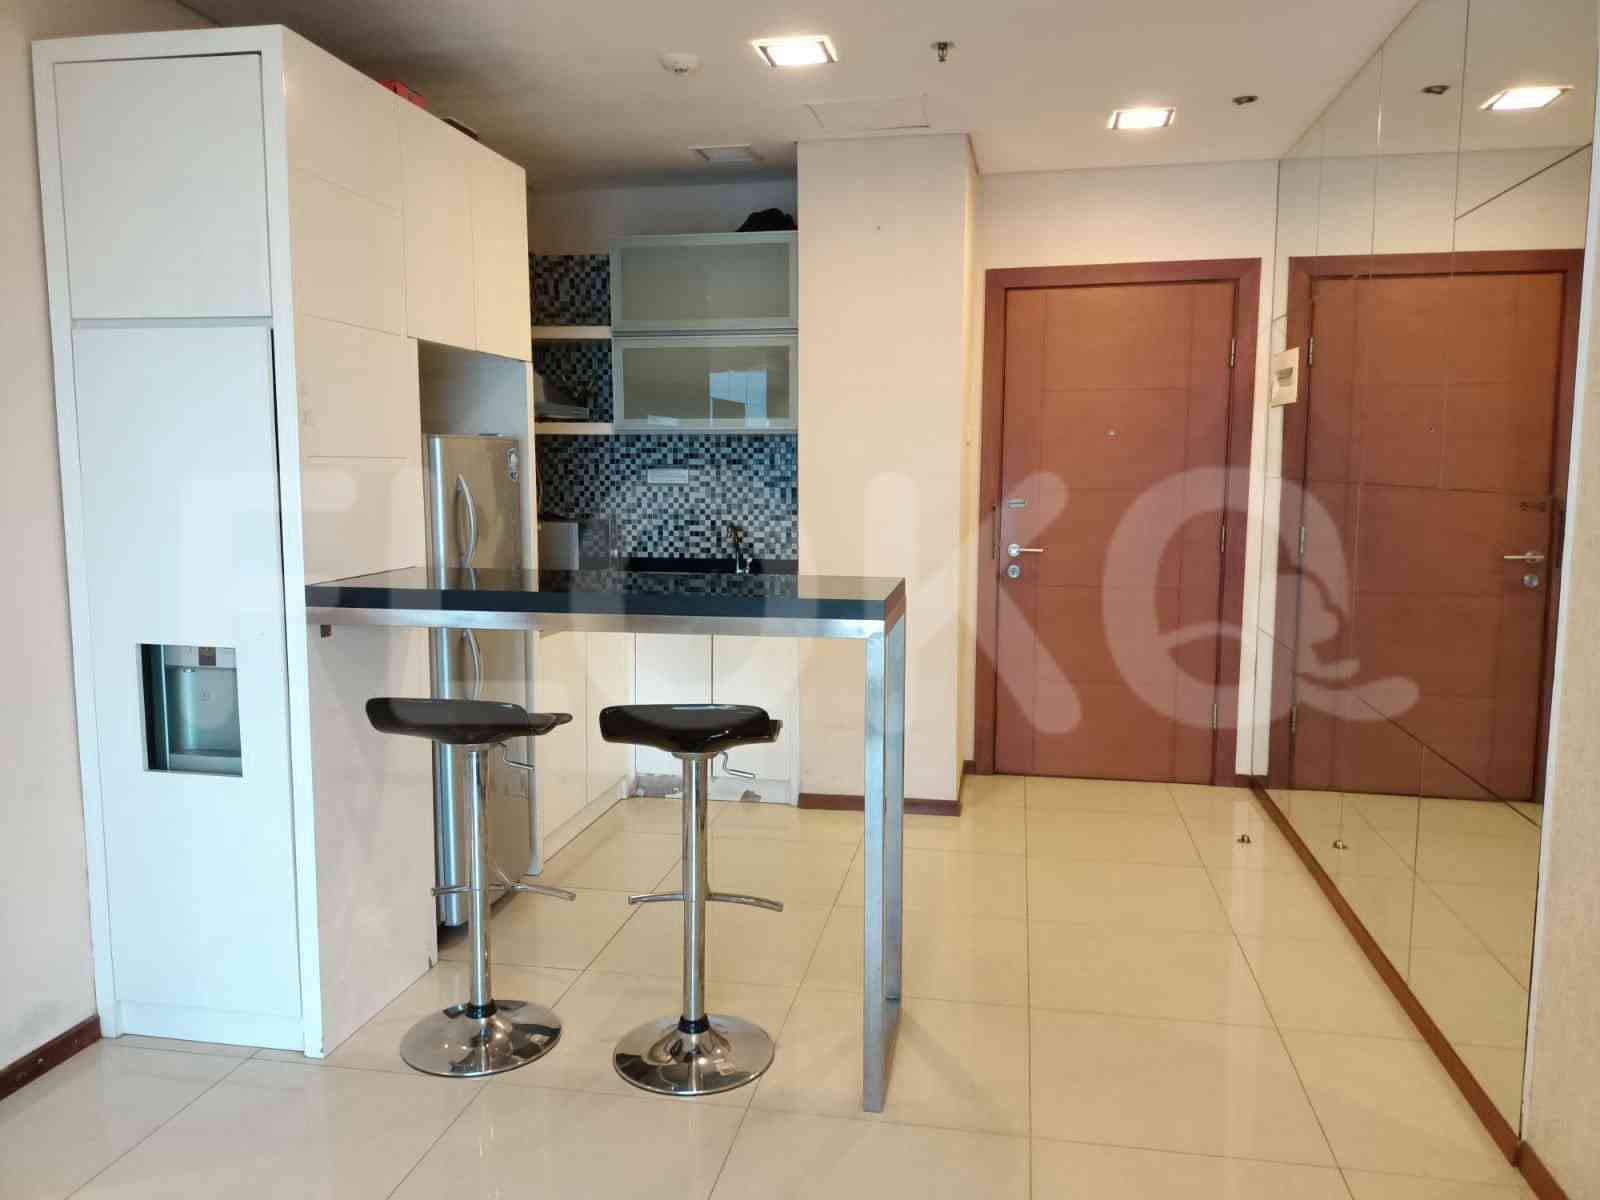 2 Bedroom on 20th Floor for Rent in Thamrin Residence Apartment - ftha8d 1